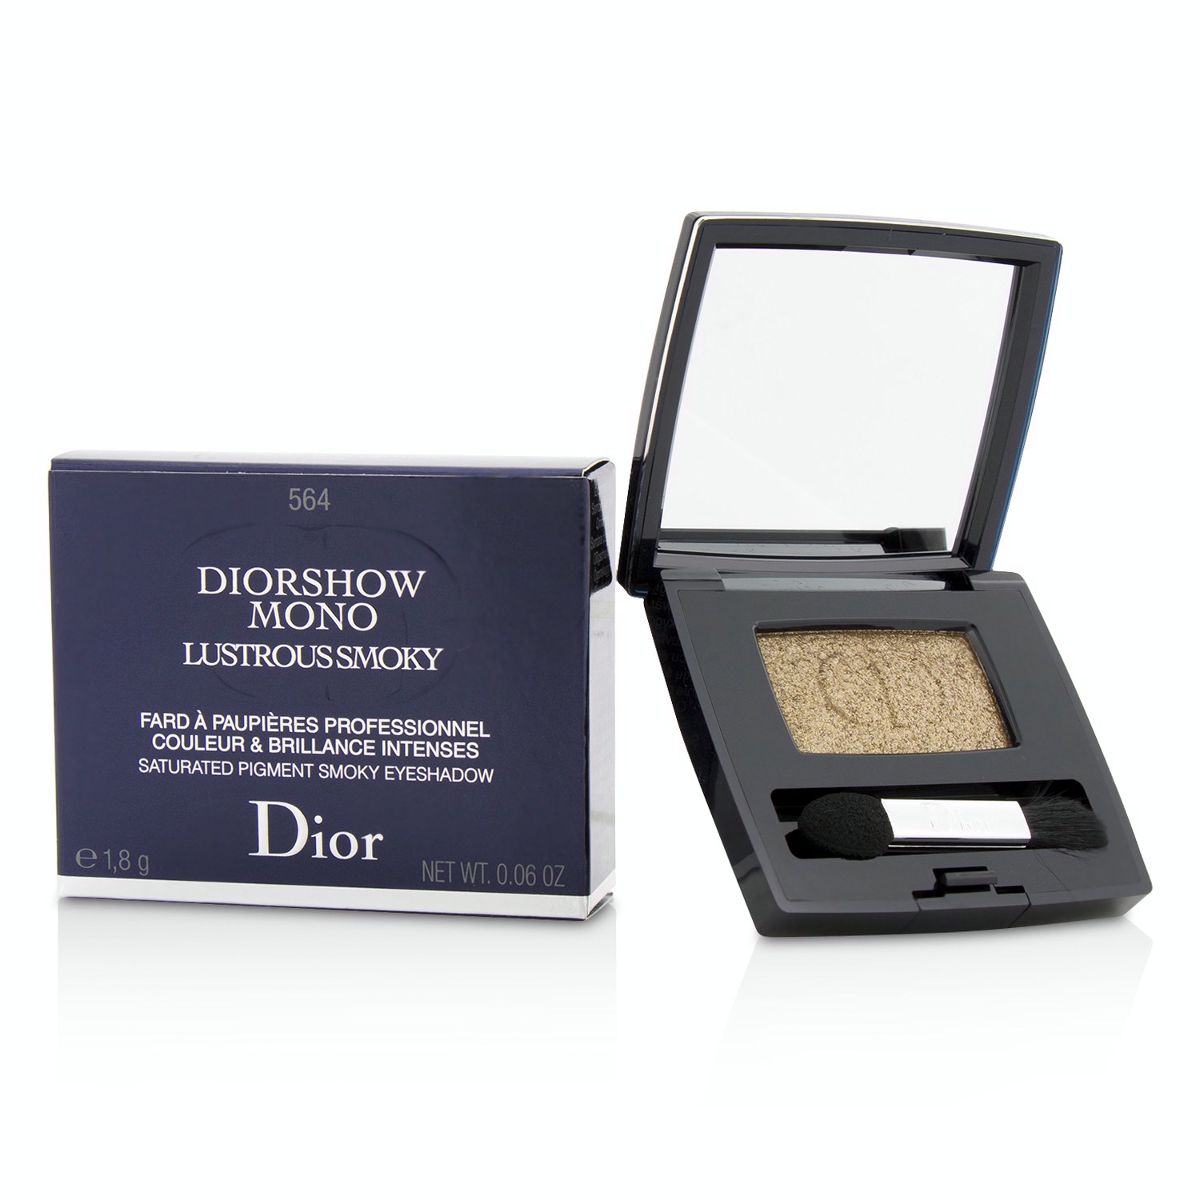 Diorshow Mono Lustrous Smoky Saturated Pigment Smoky Eyeshadow - # 564 Fire Christian Dior Image